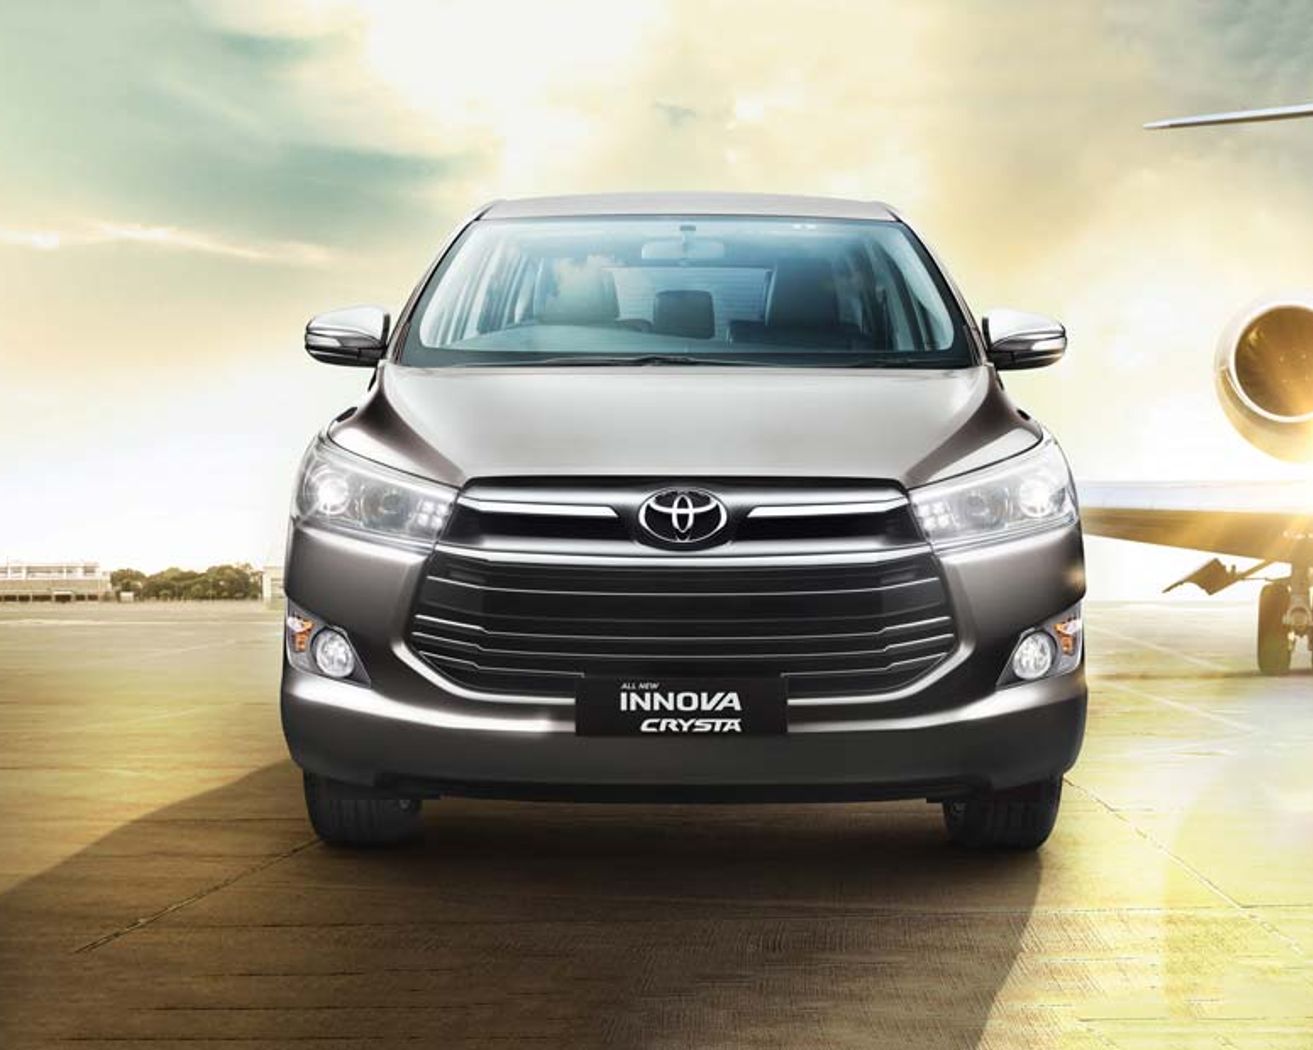 Toyota Innova Crysta Prices In Pune Specs Colors Showrooms